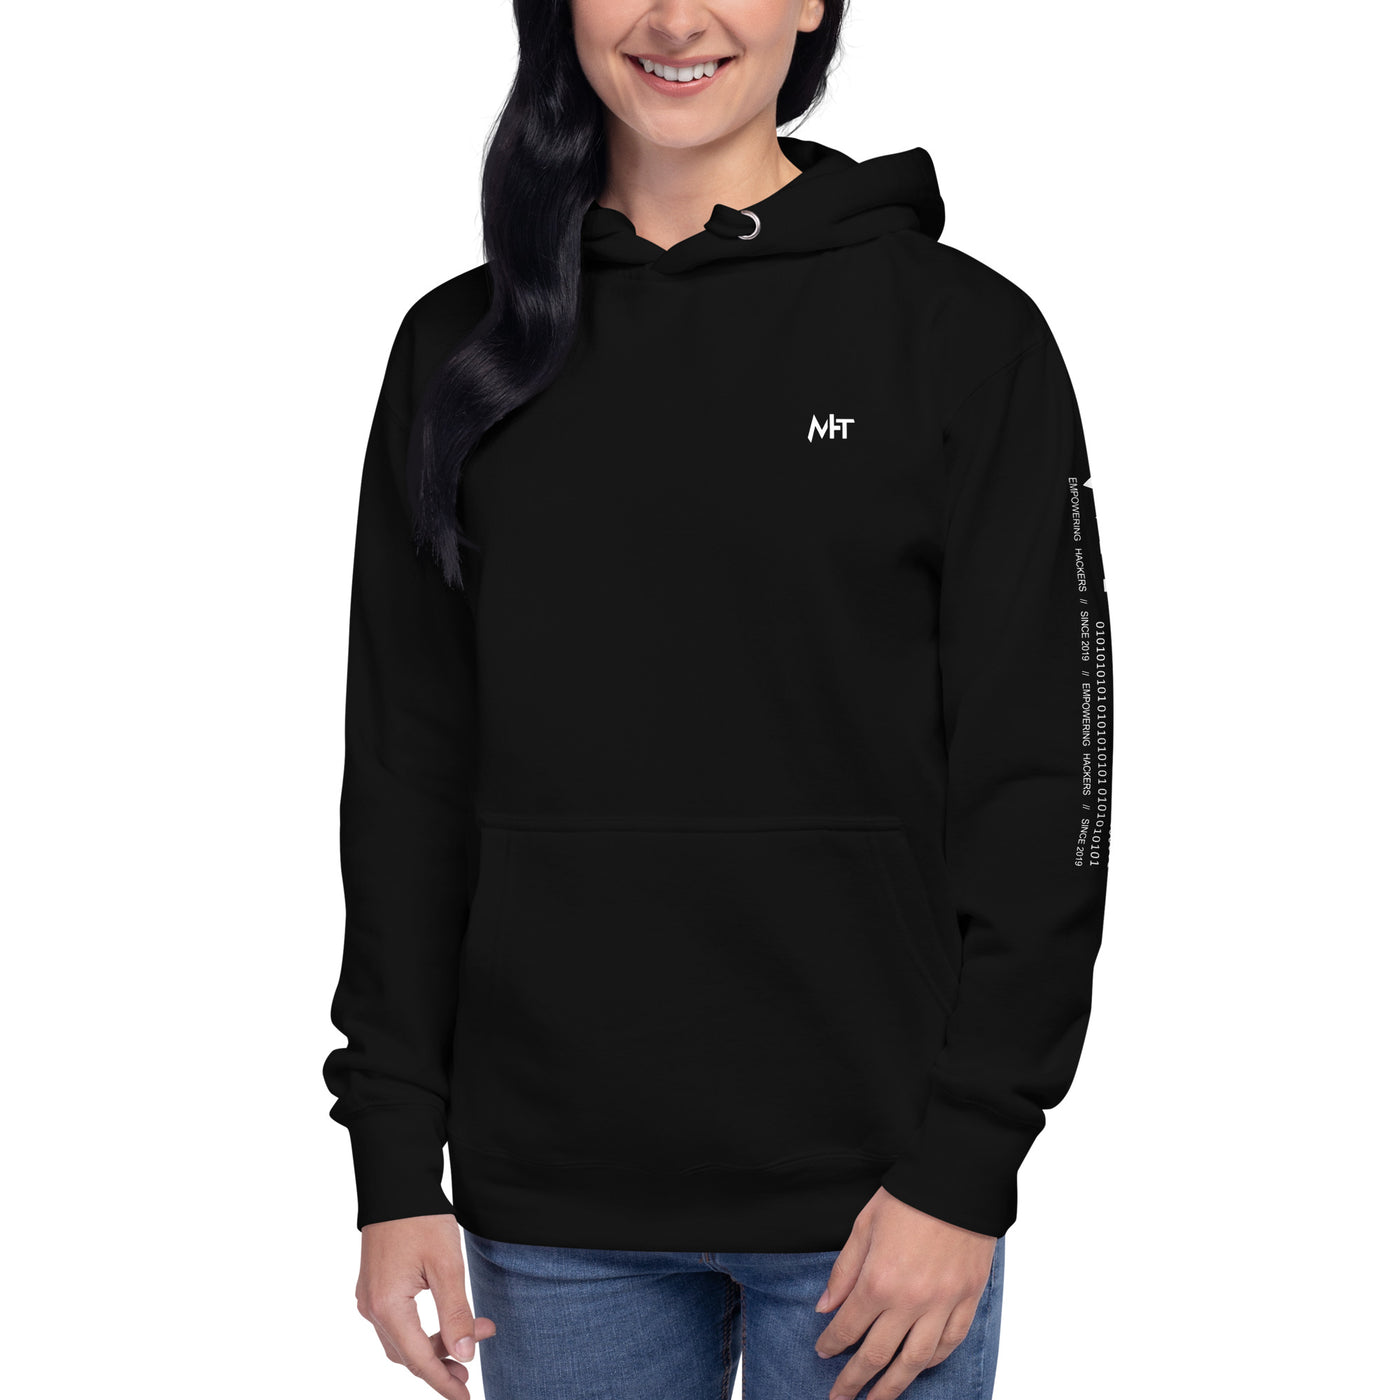 Usually I Like Most of the People But I Hate everyone who Folds - Unisex Hoodie ( Back Print )